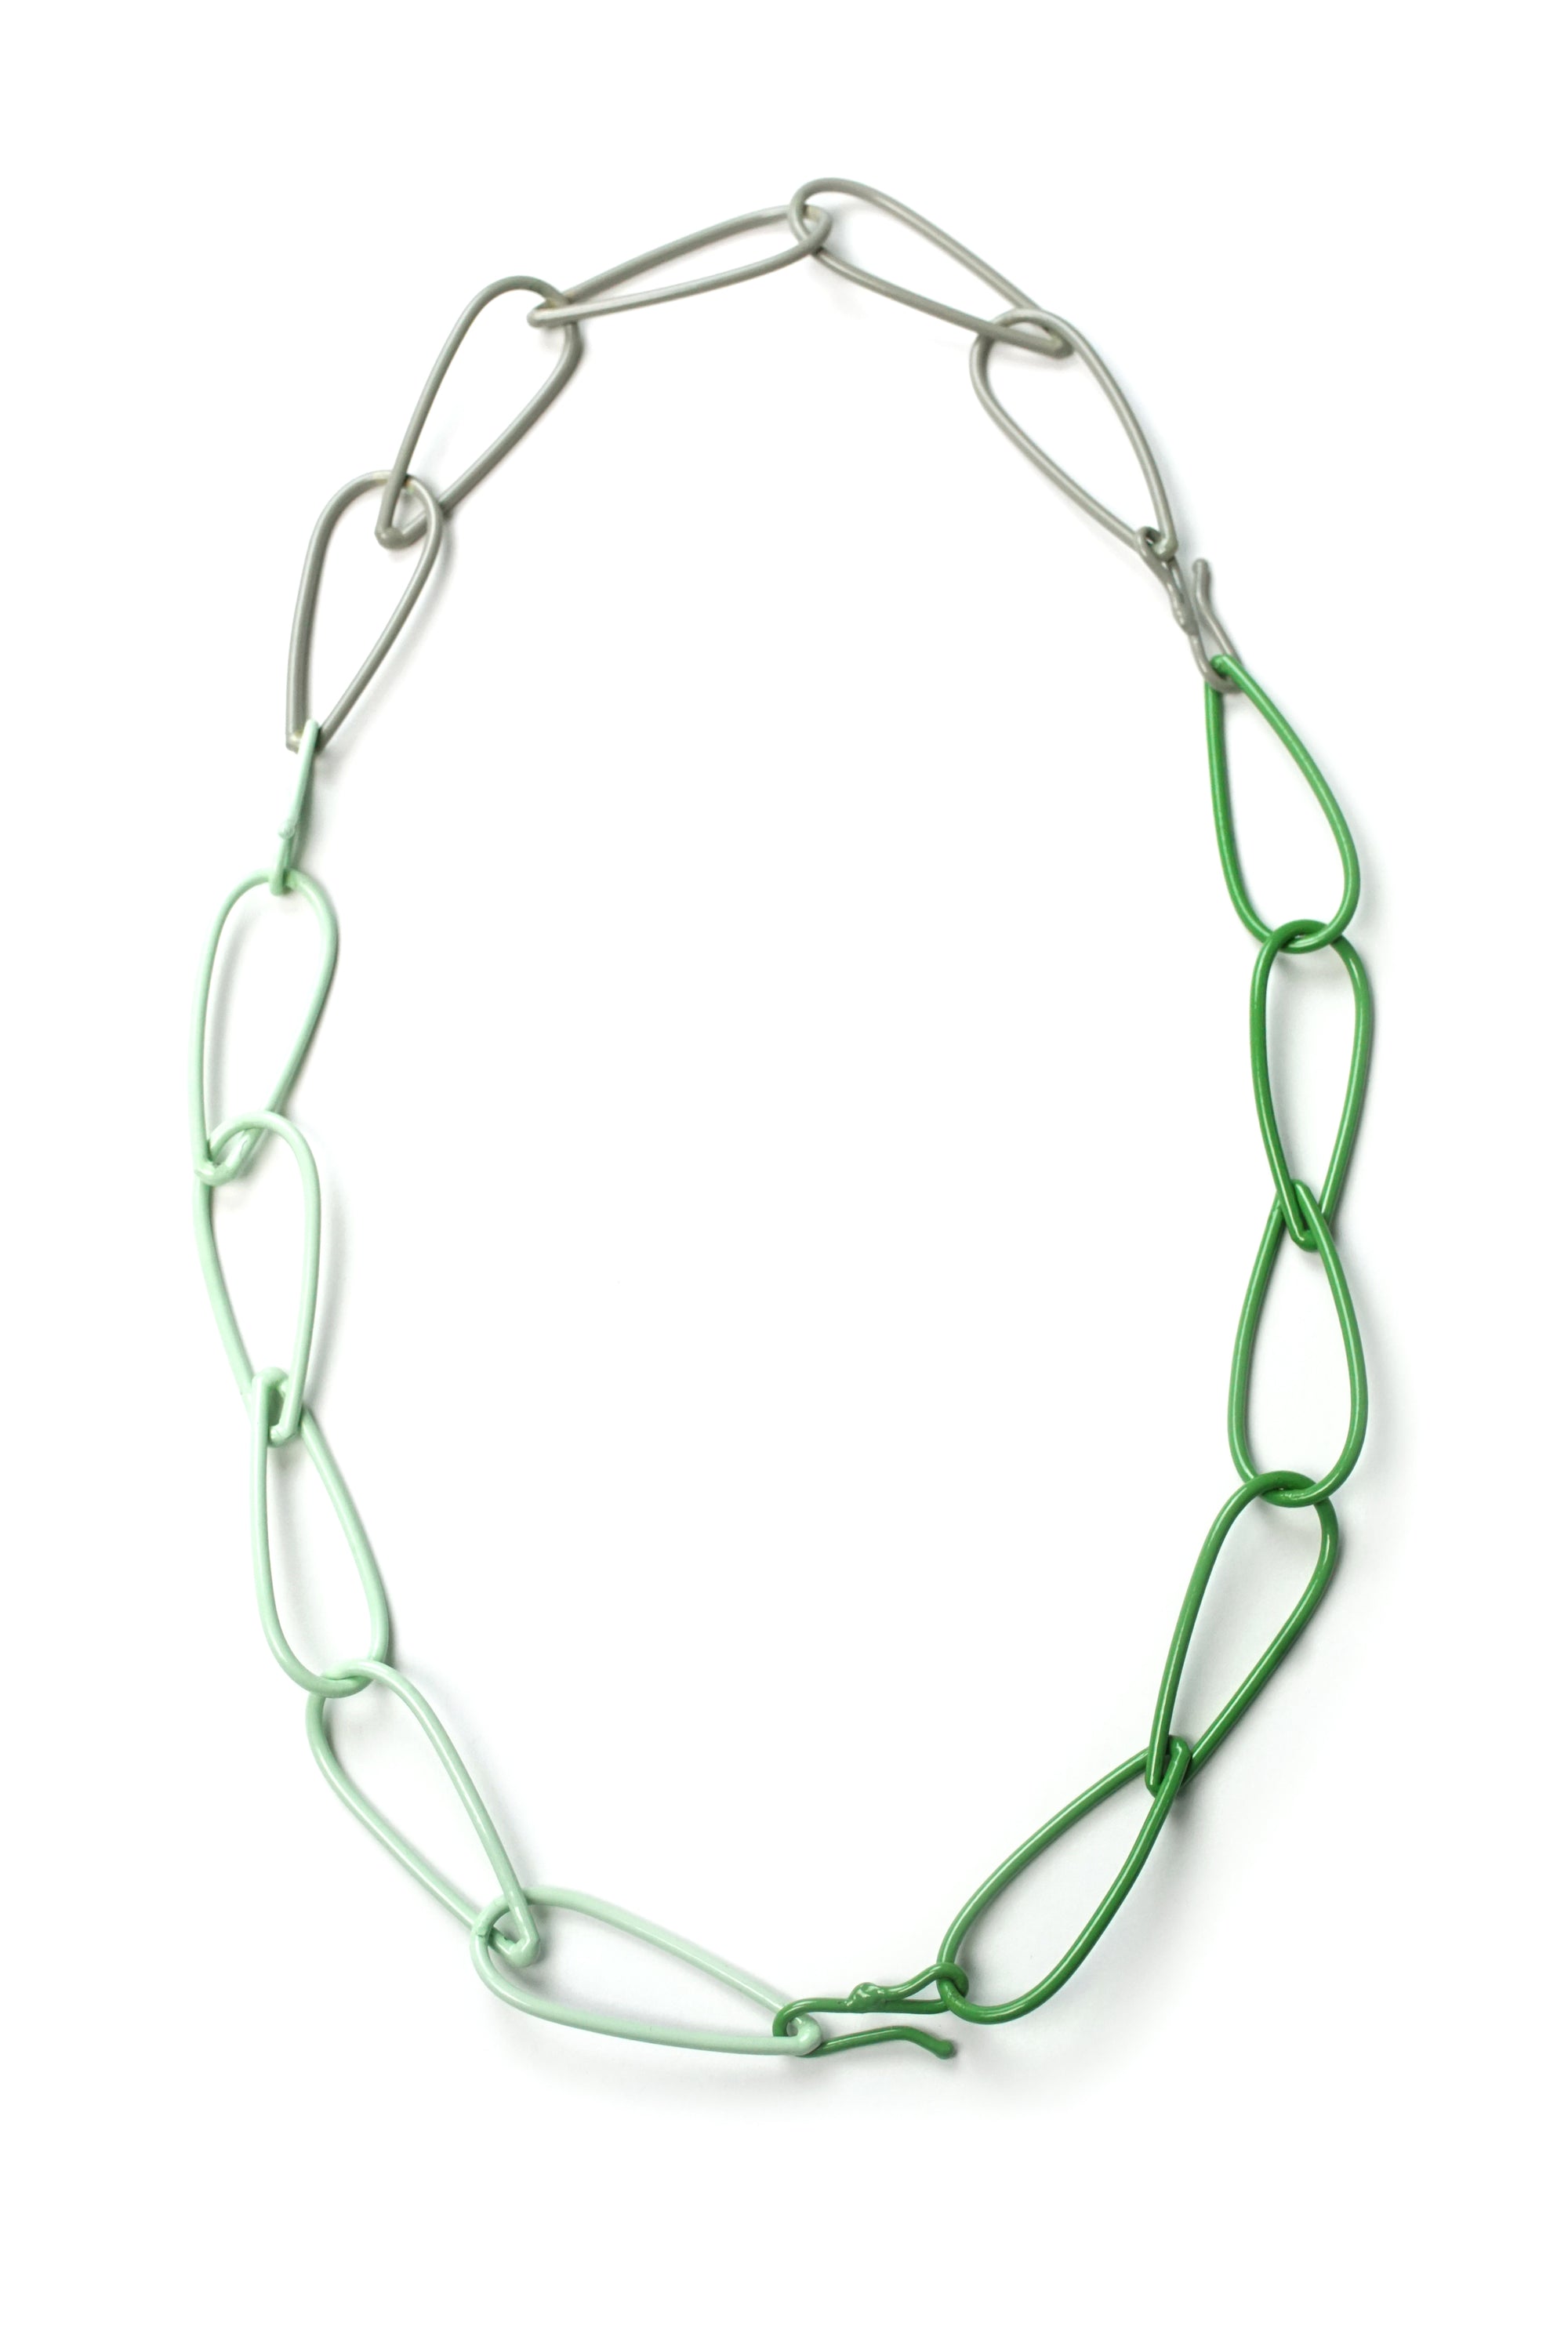 Modular Necklace in Fresh Green, Soft Mint, and Stone Grey